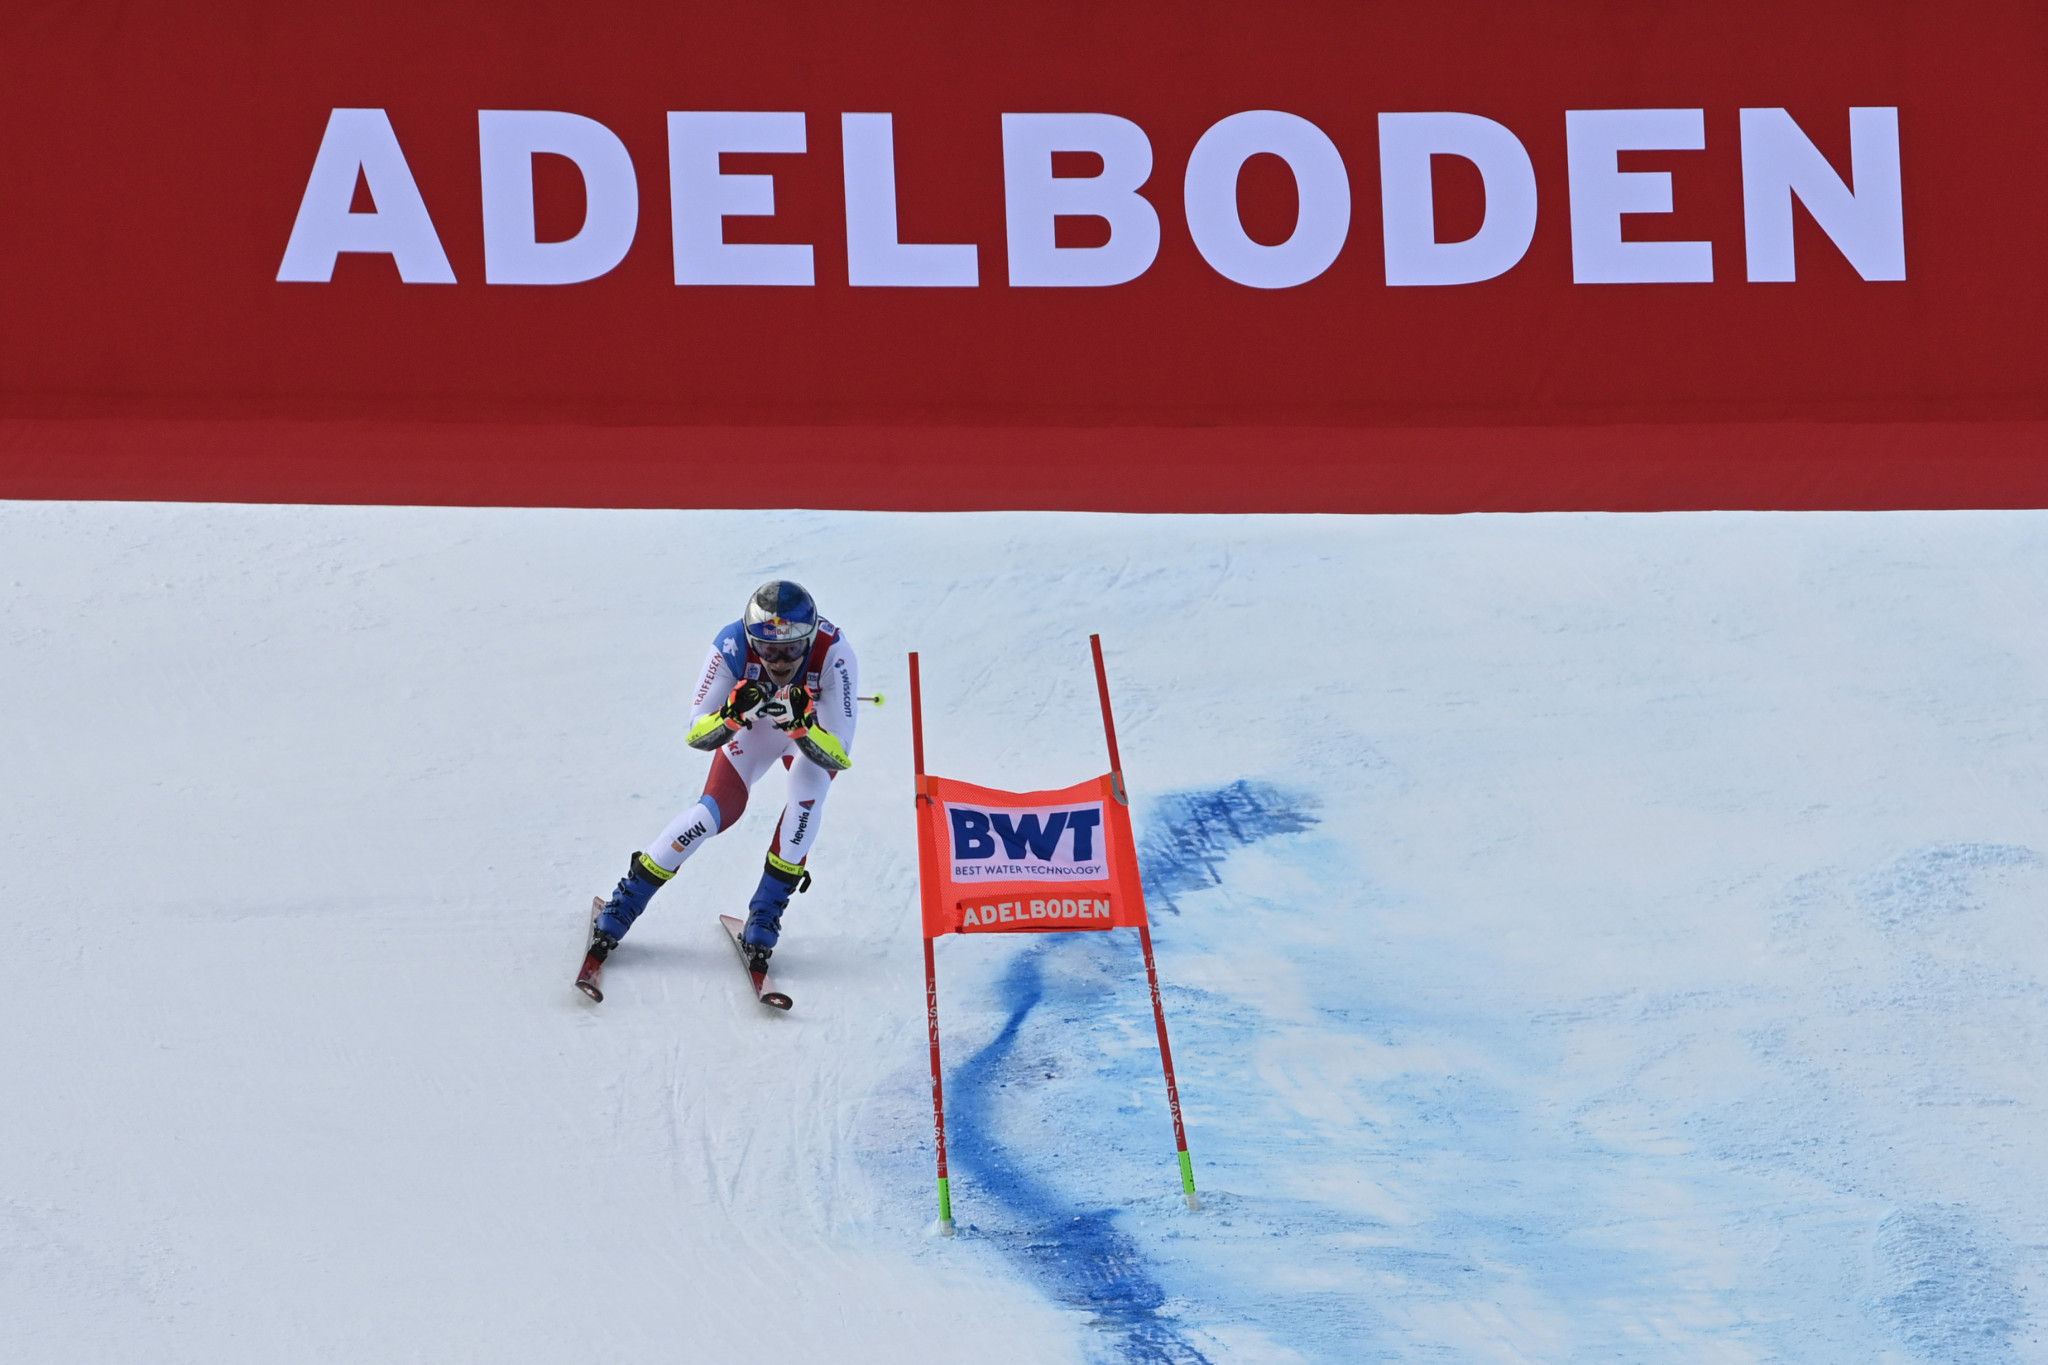 Odermatt extends overall season lead with stunning performance at Alpine Ski World Cup